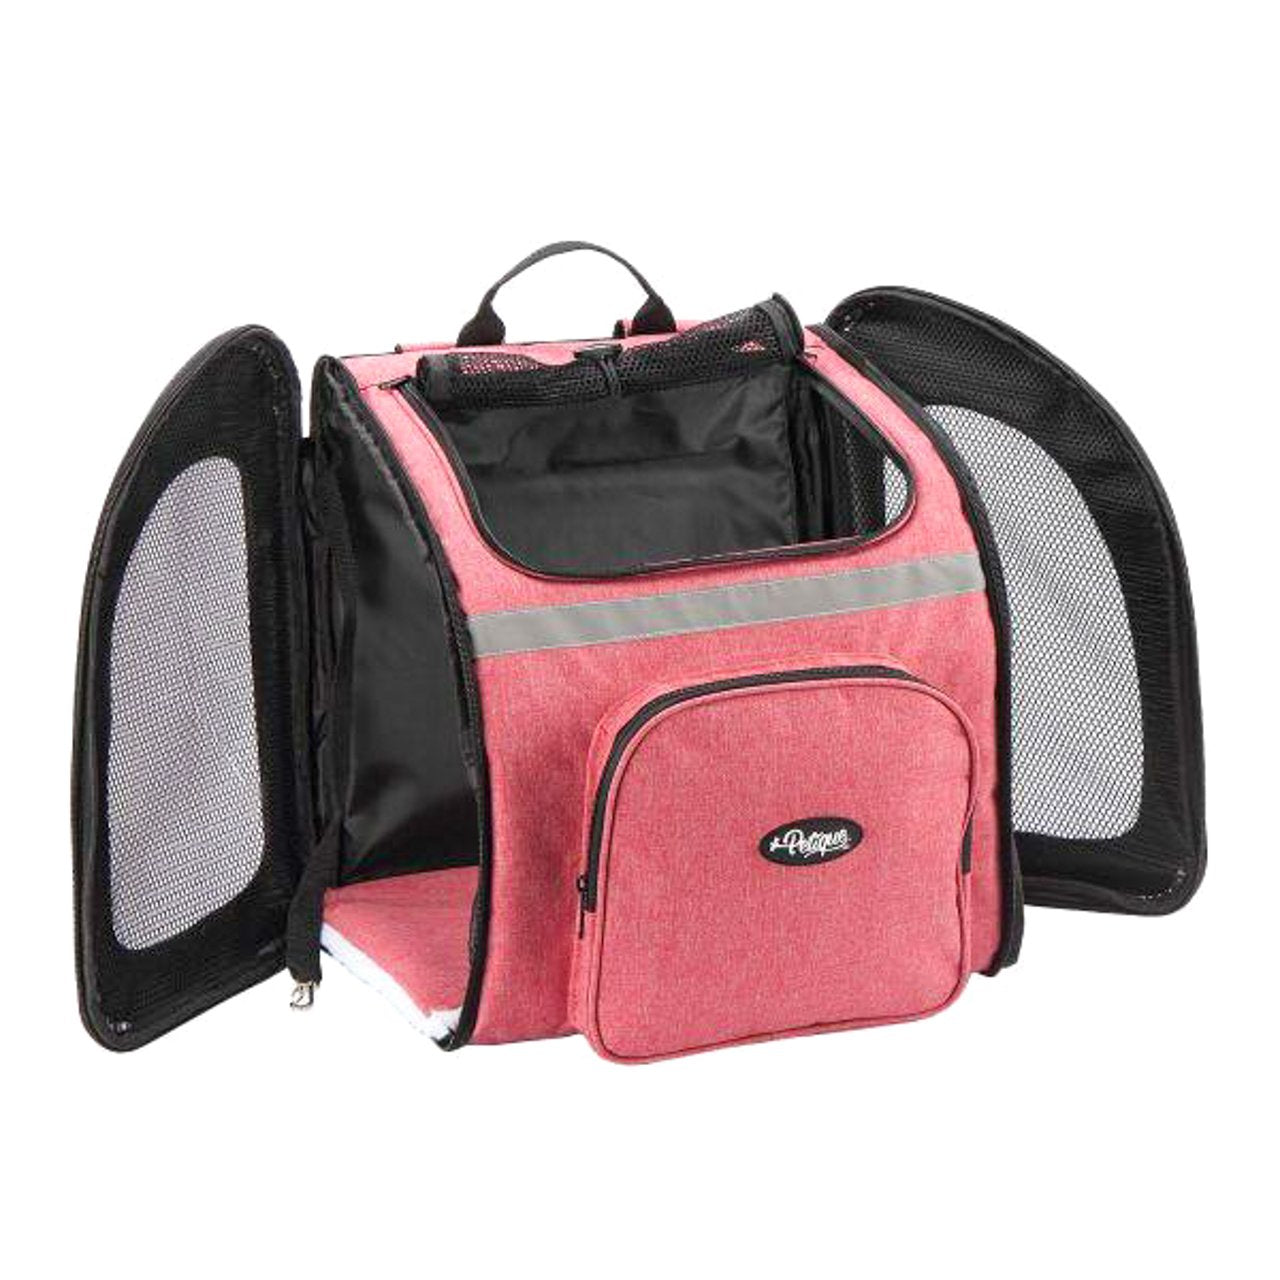 backpack pet carrier for dogs and cats